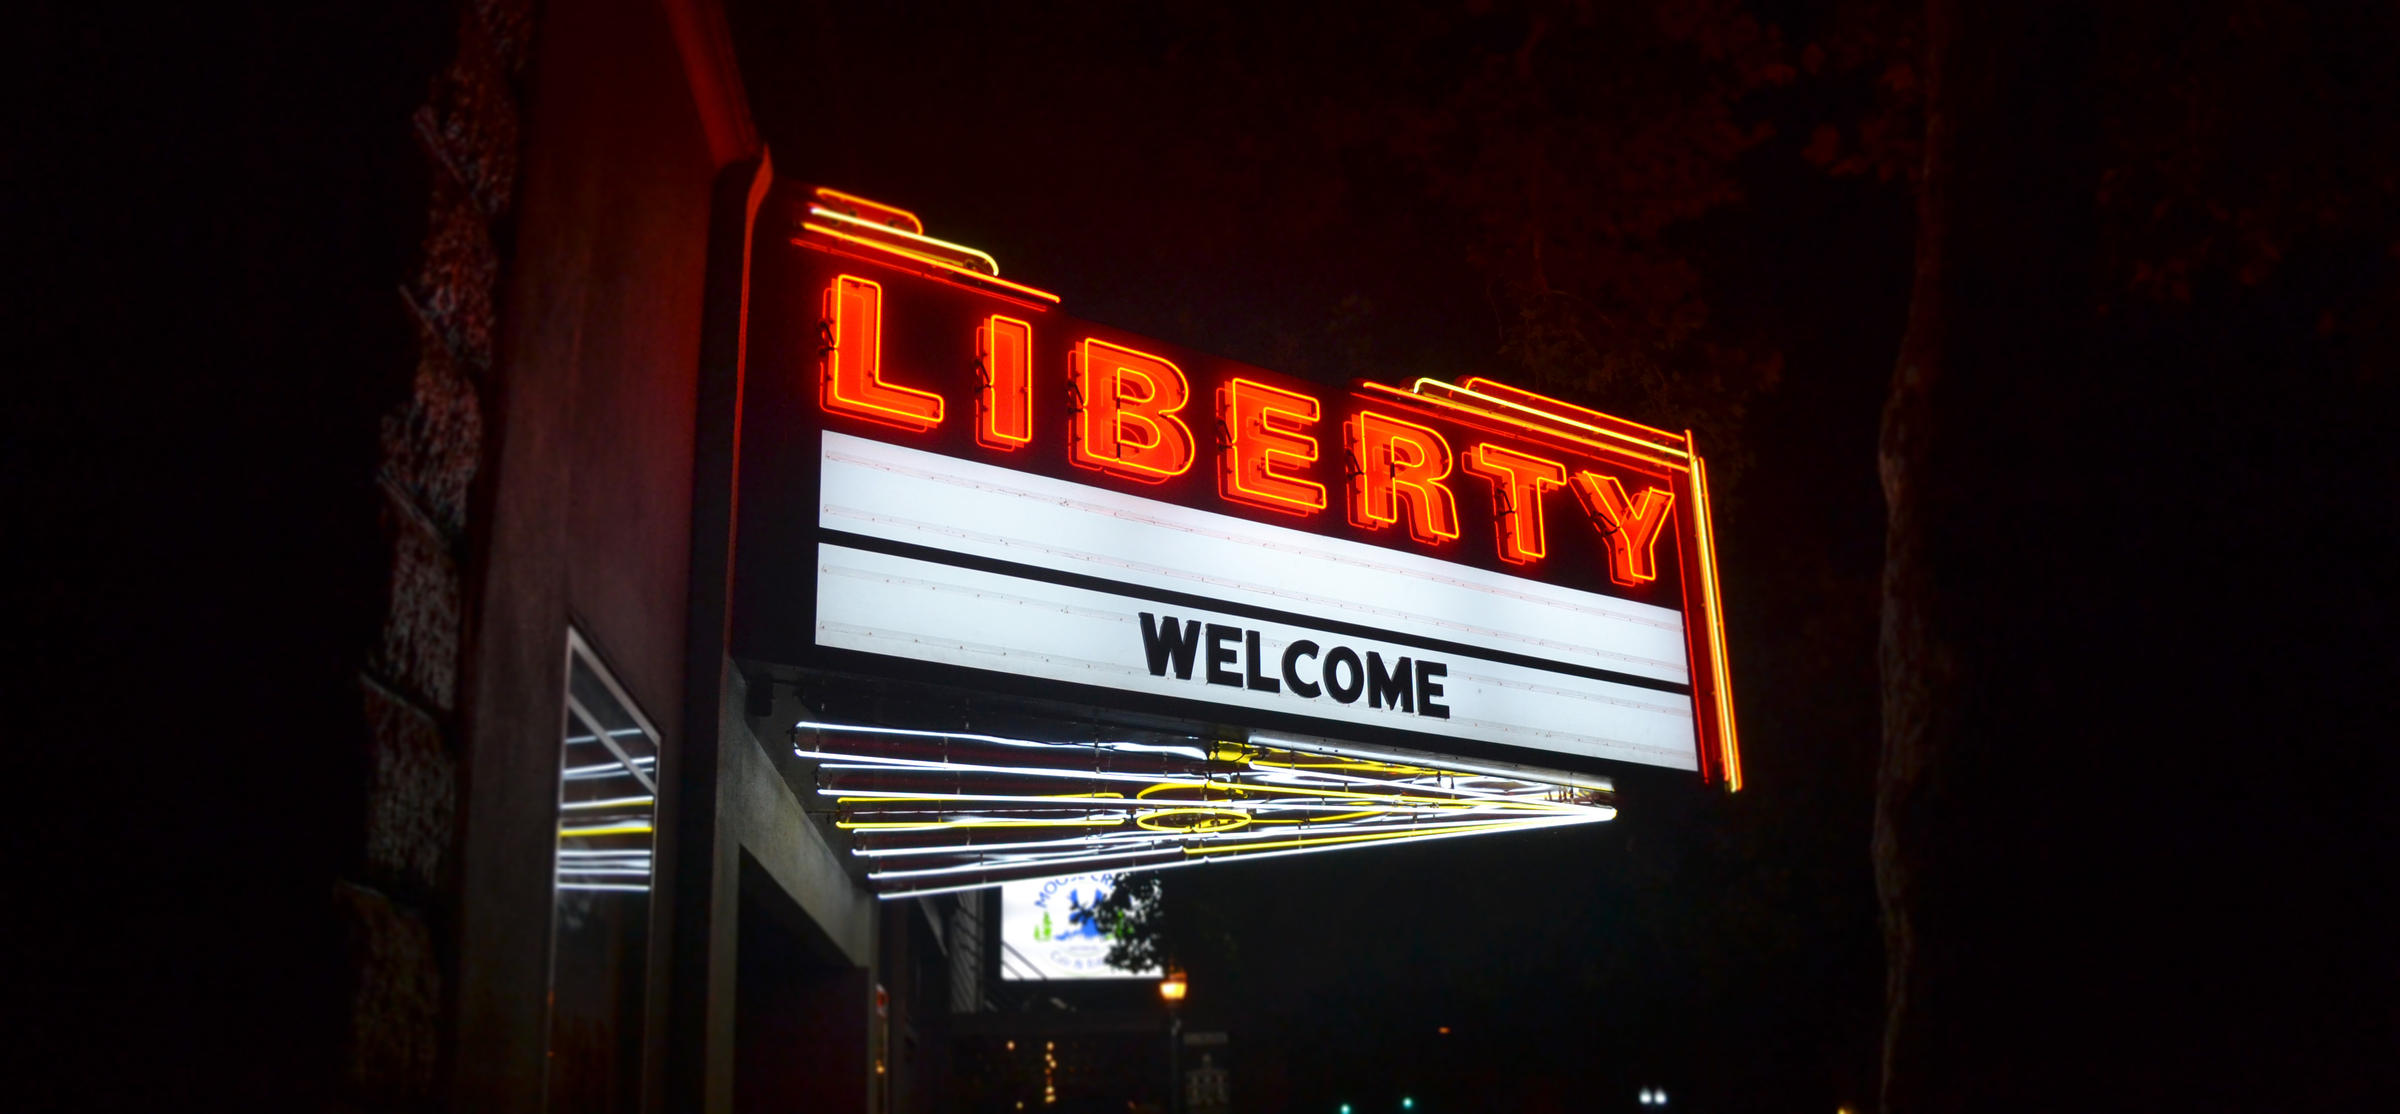 Dayton's Liberty Theatre has been closed to events since March, but hopes to reopen in July. Courtesy of Liberty Theater